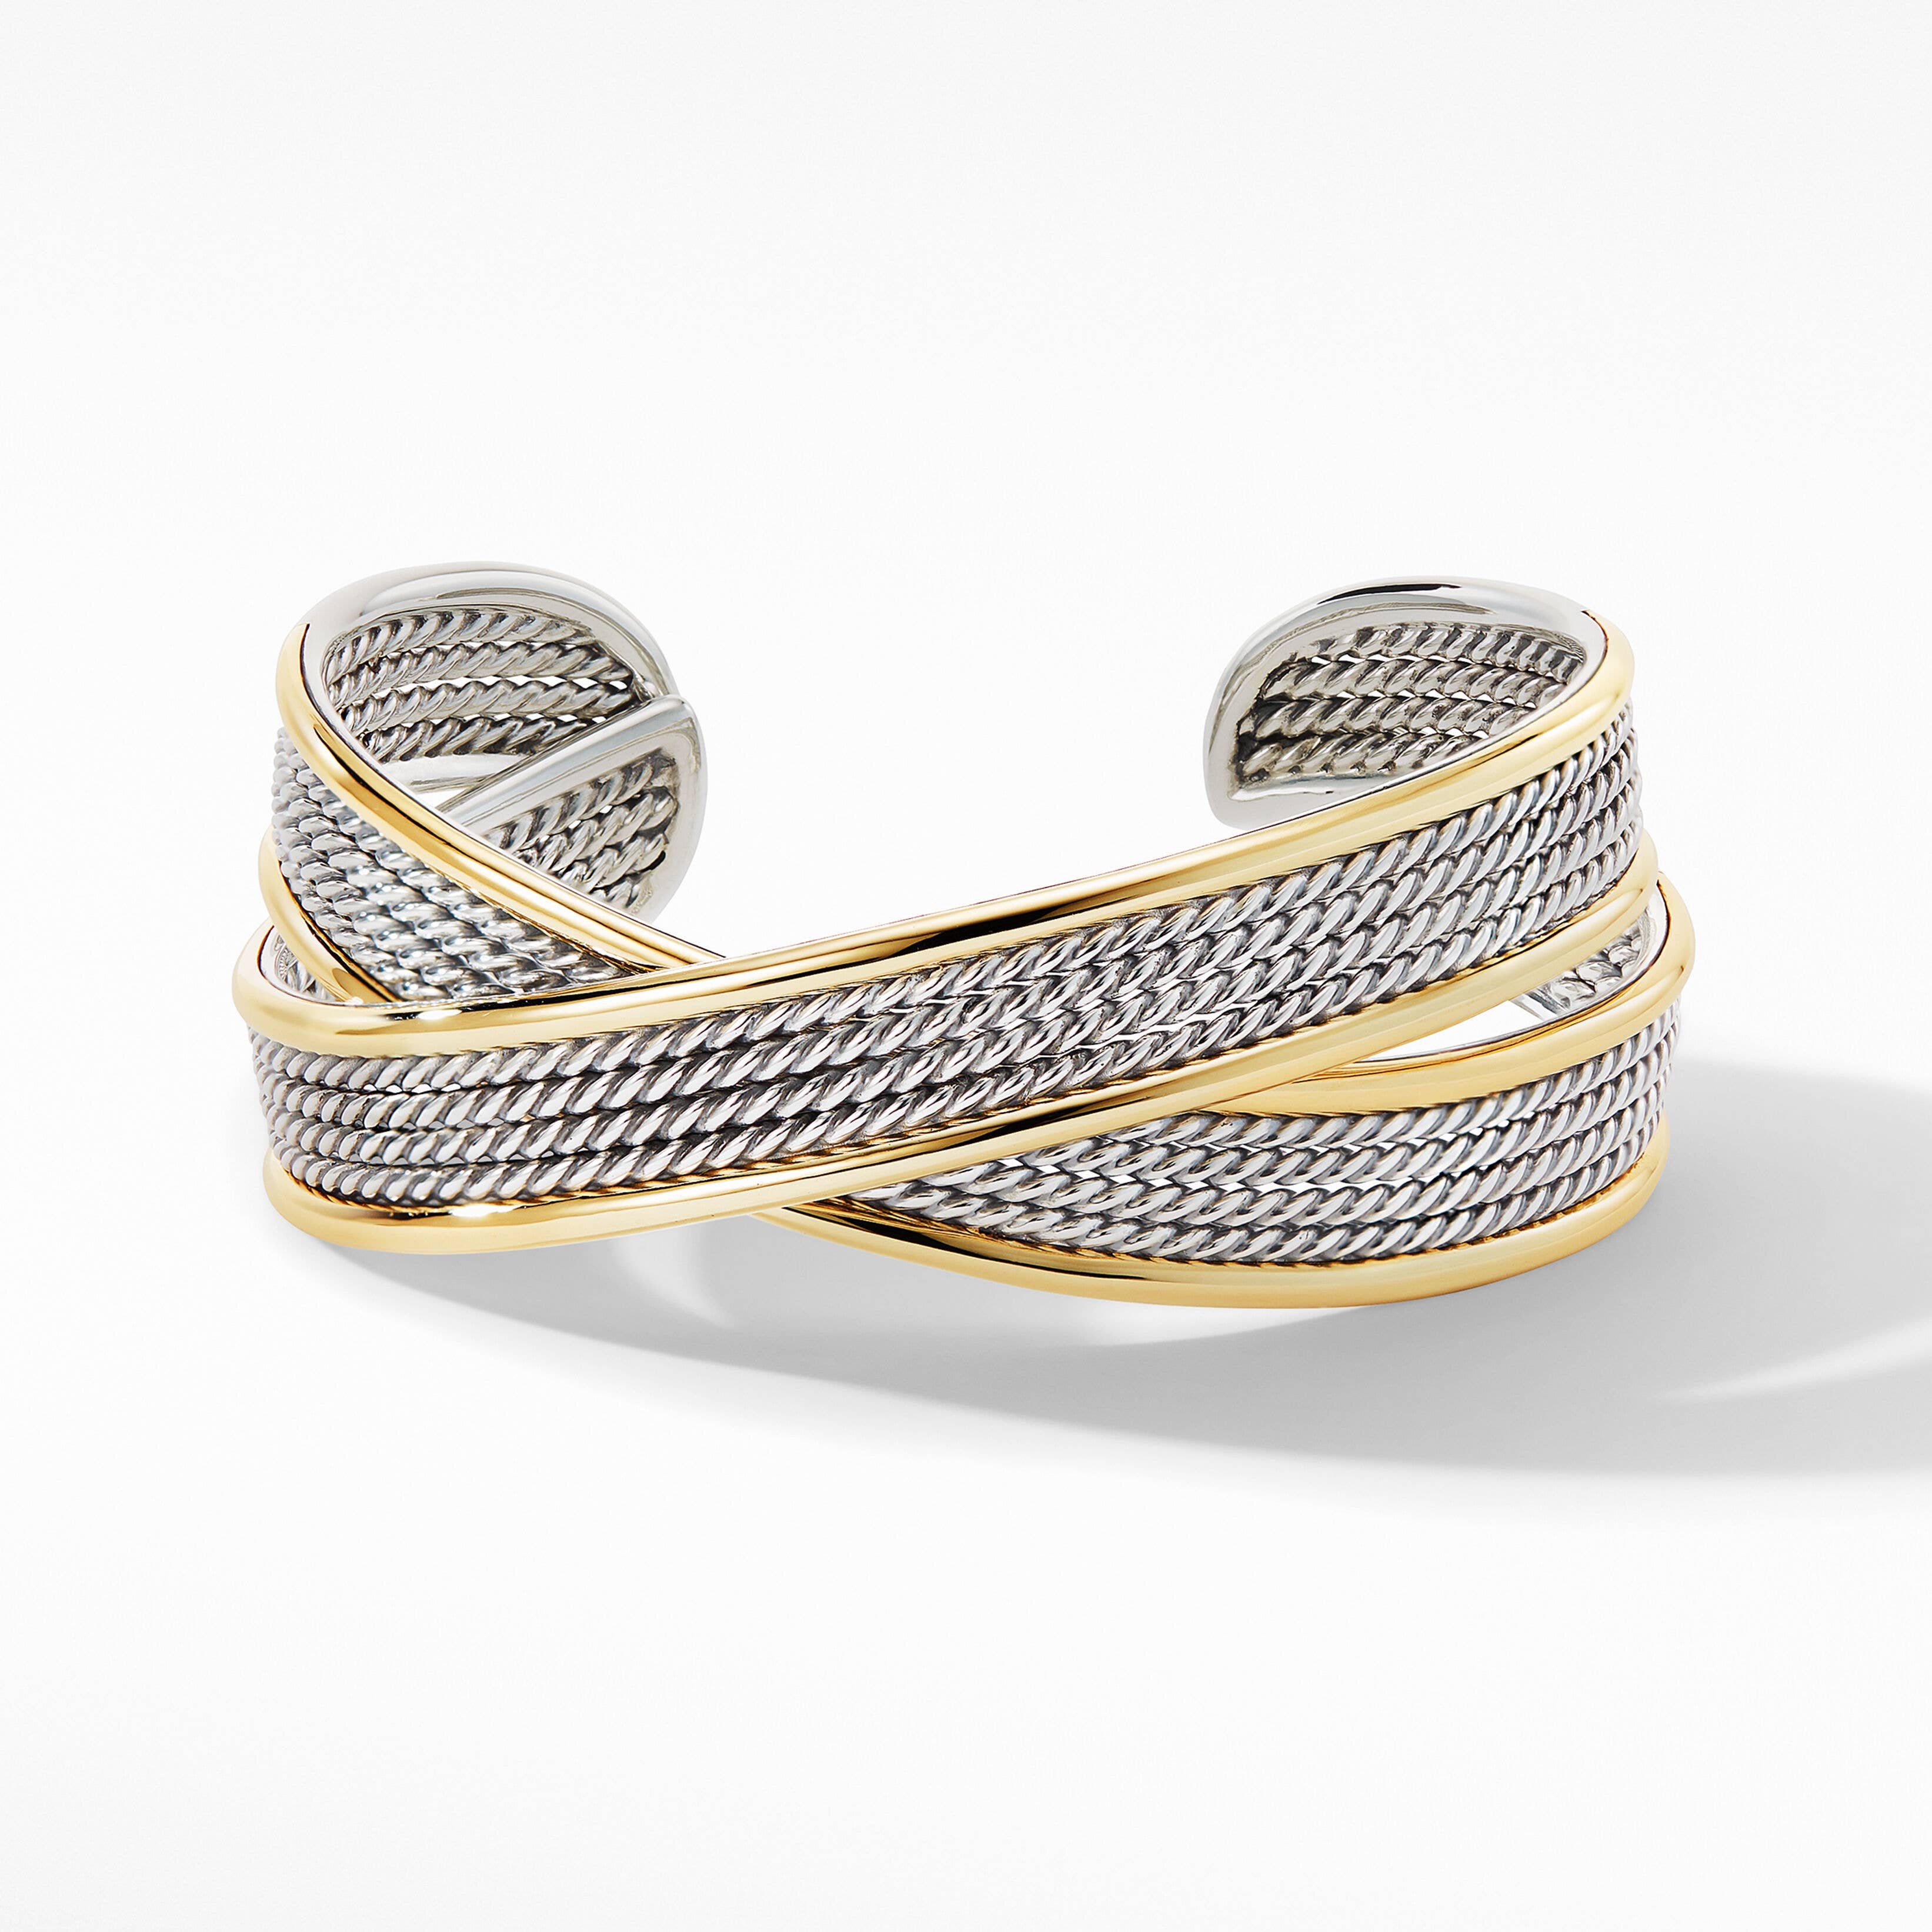 DY Origami Cuff Bracelet with 18K Yellow Gold